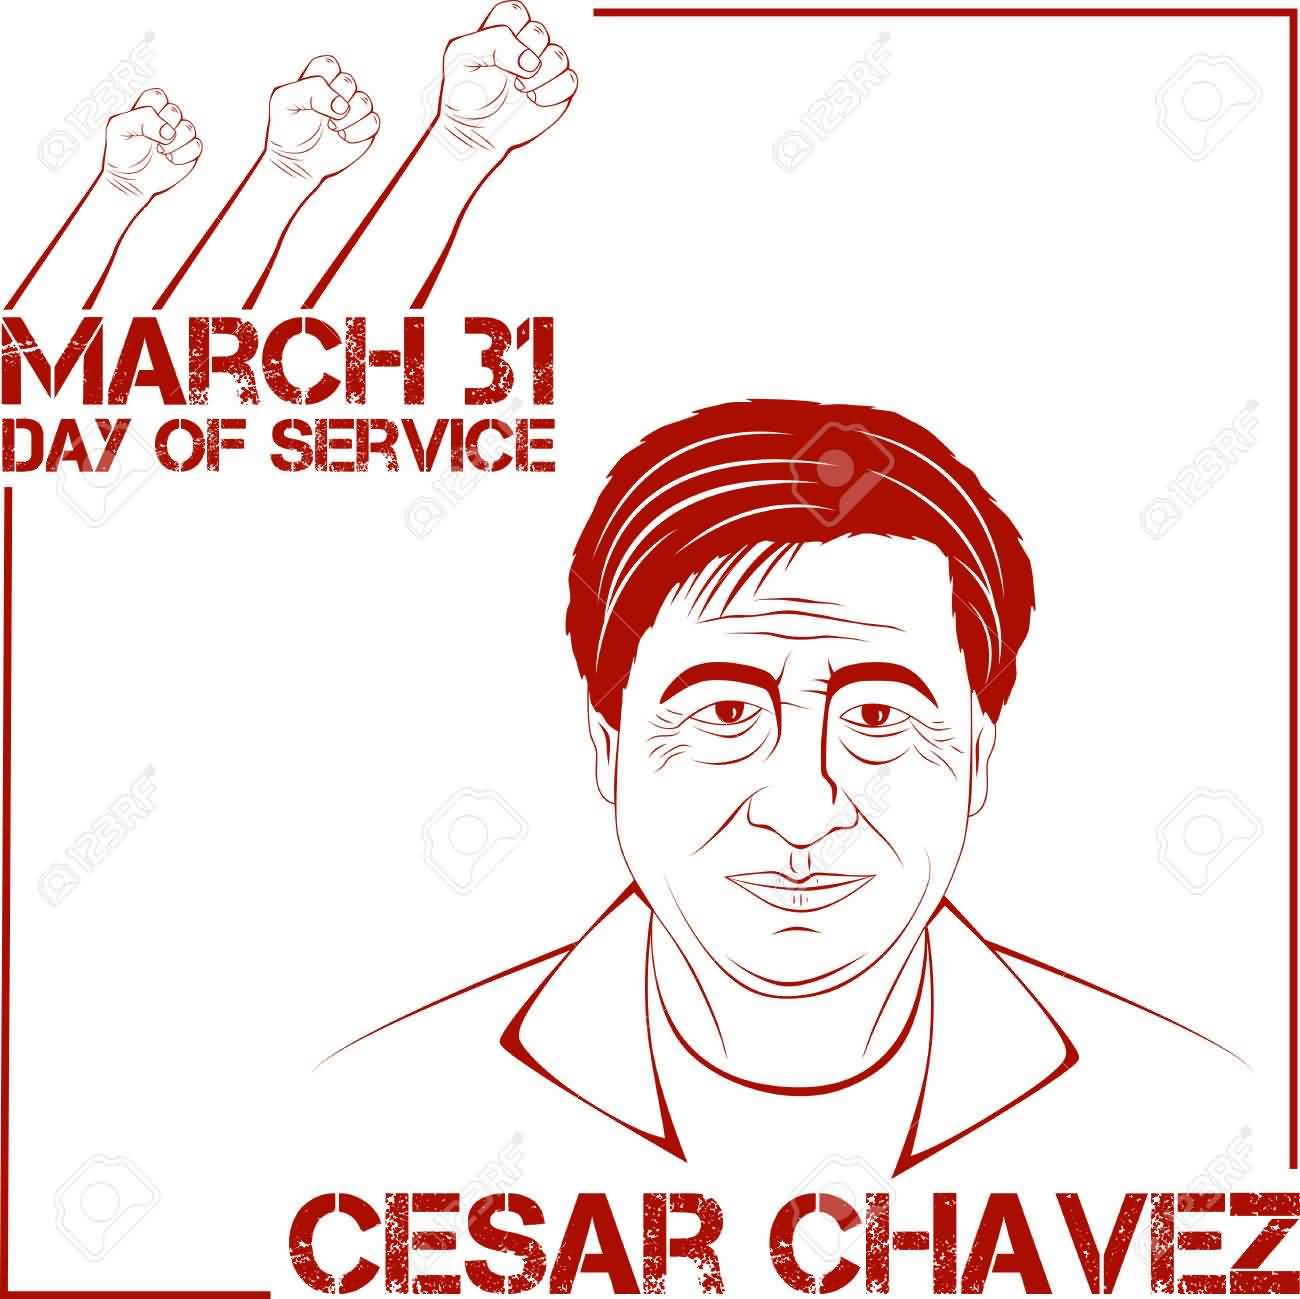 March 31 Day Of Service Cesar Chavez Illustration